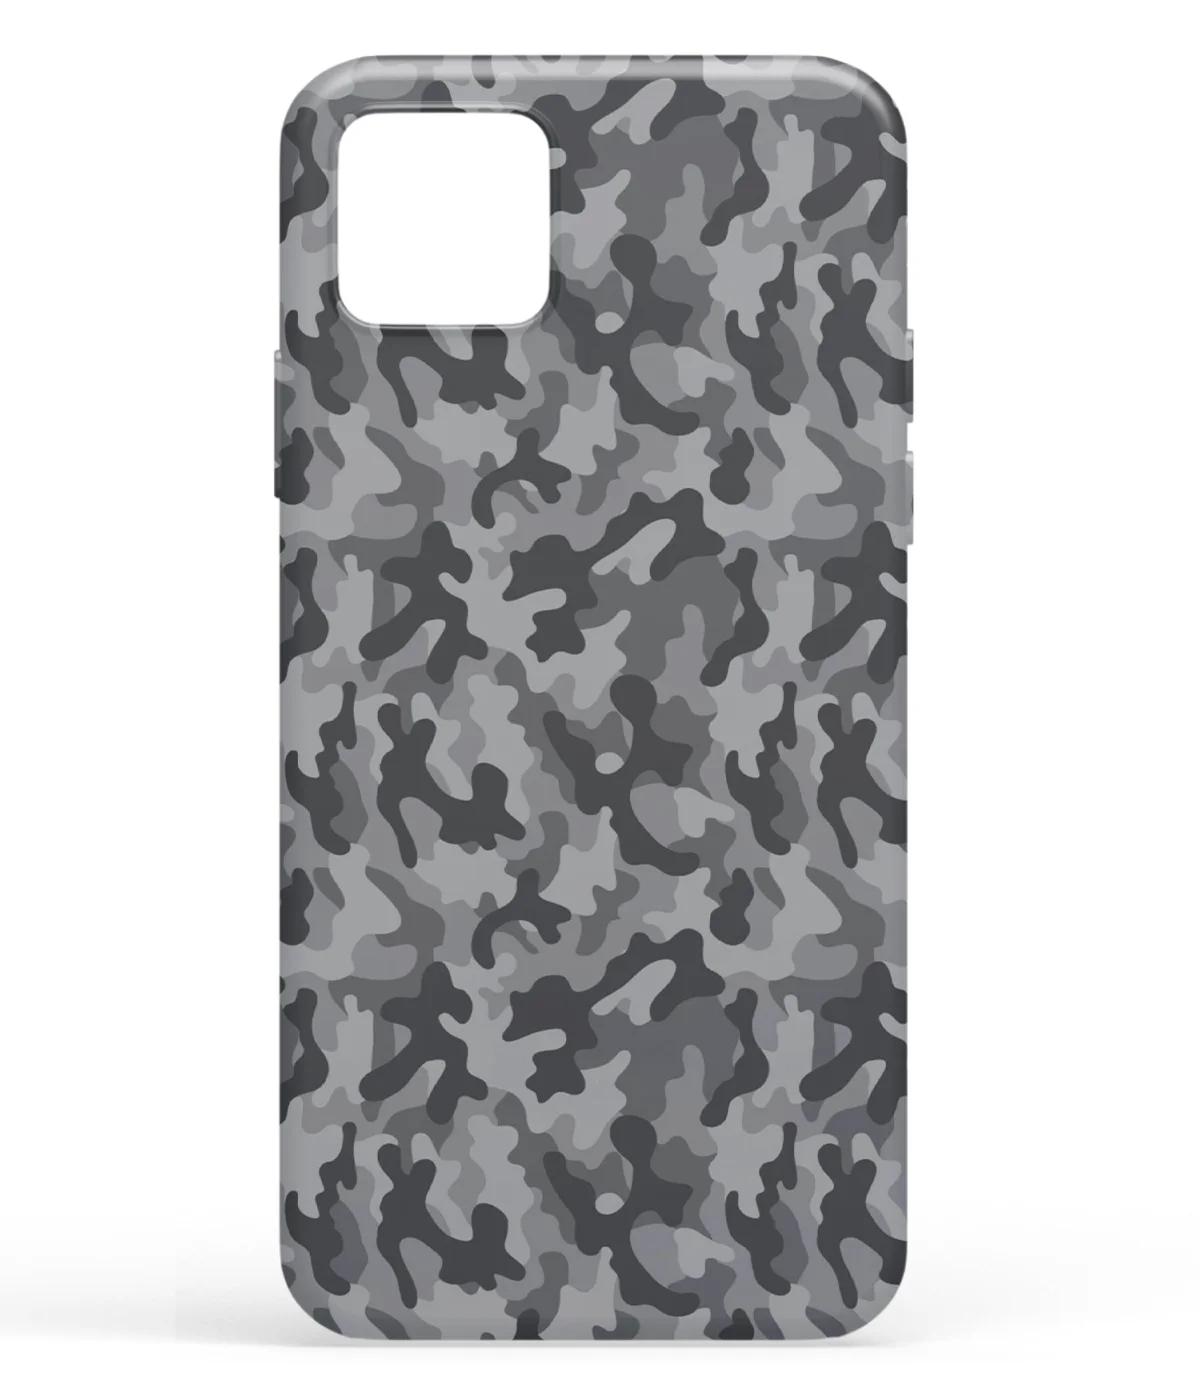 Cameo Pattern Grey Printed Soft Silicone Mobile Back Cover